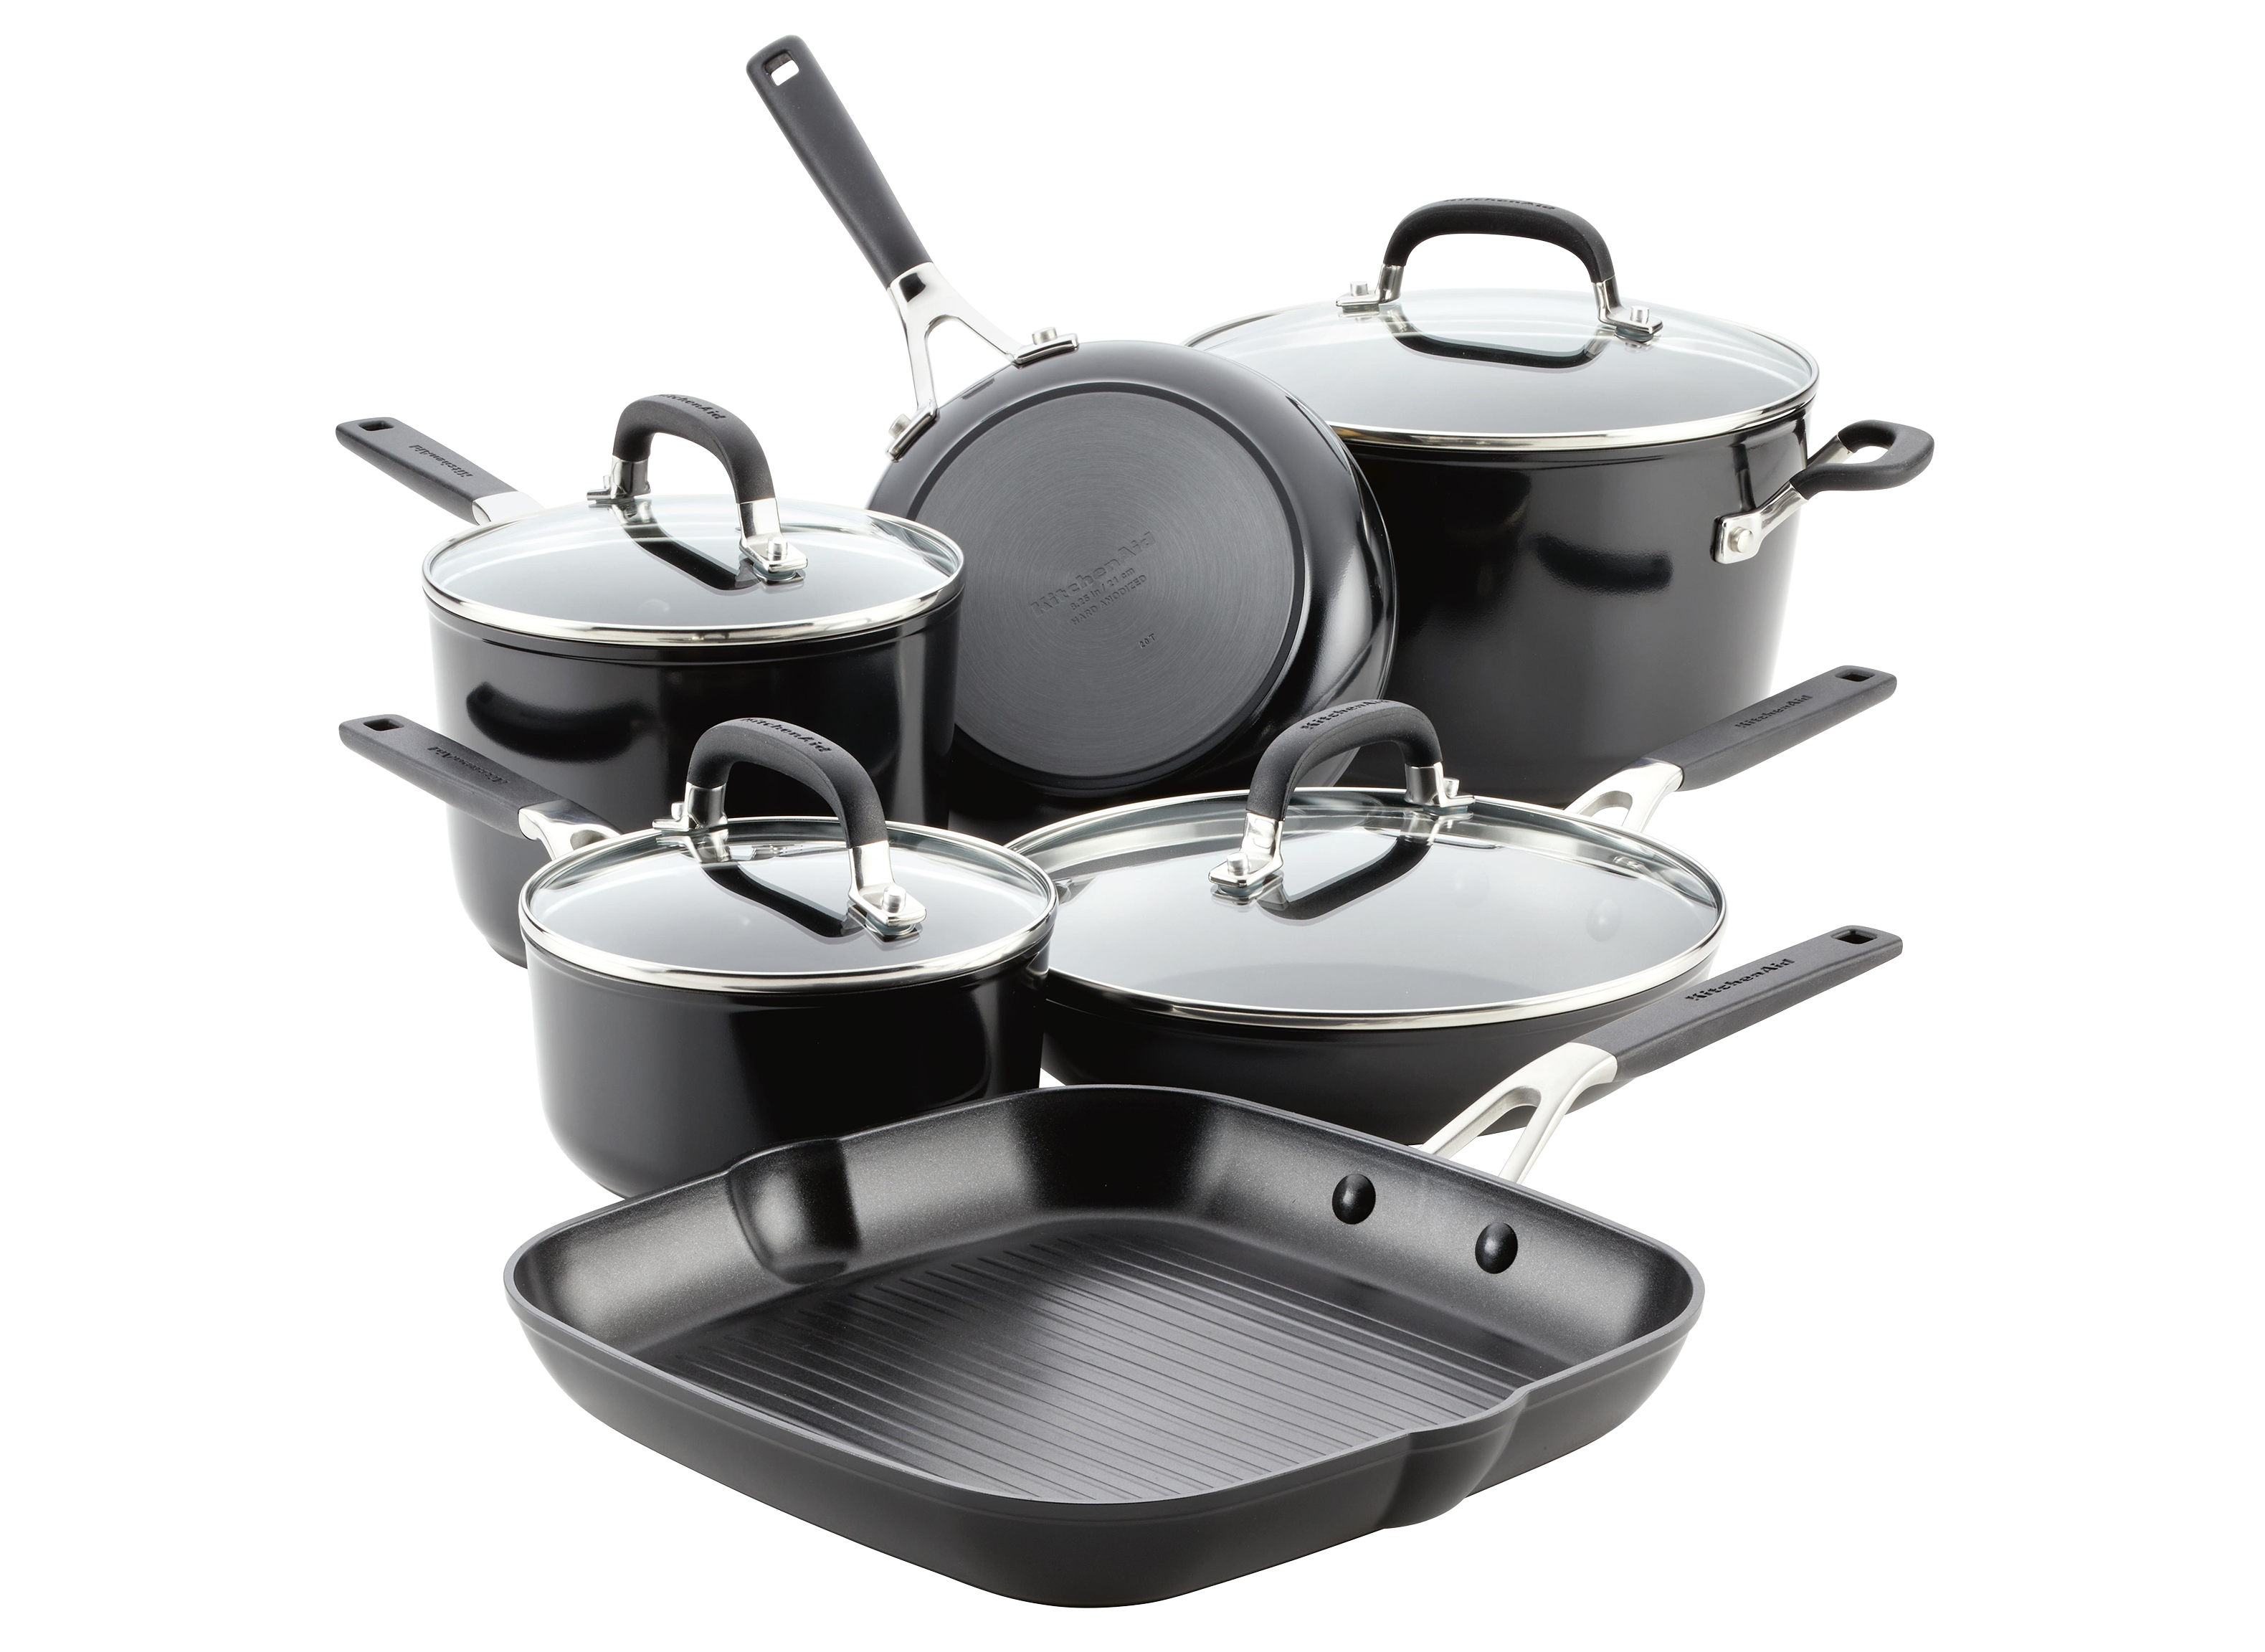 Benefits of Cooking with Hard Anodized Cookware